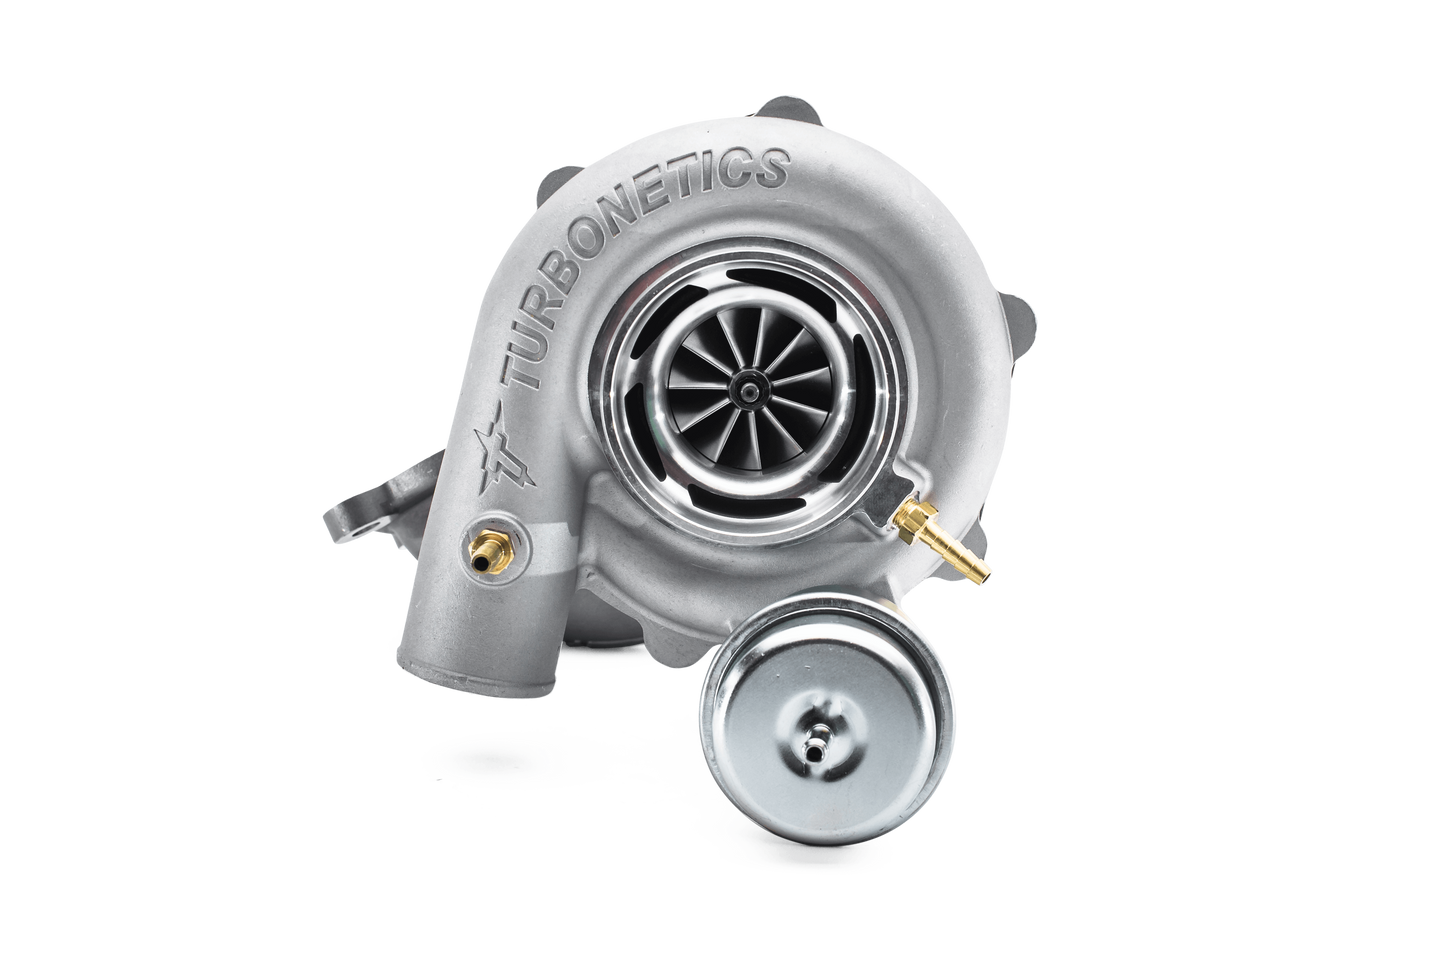 Turbonetics NX2 Drop-In Turbo Upgrade Kit for Mustang Ecoboost 2.3L